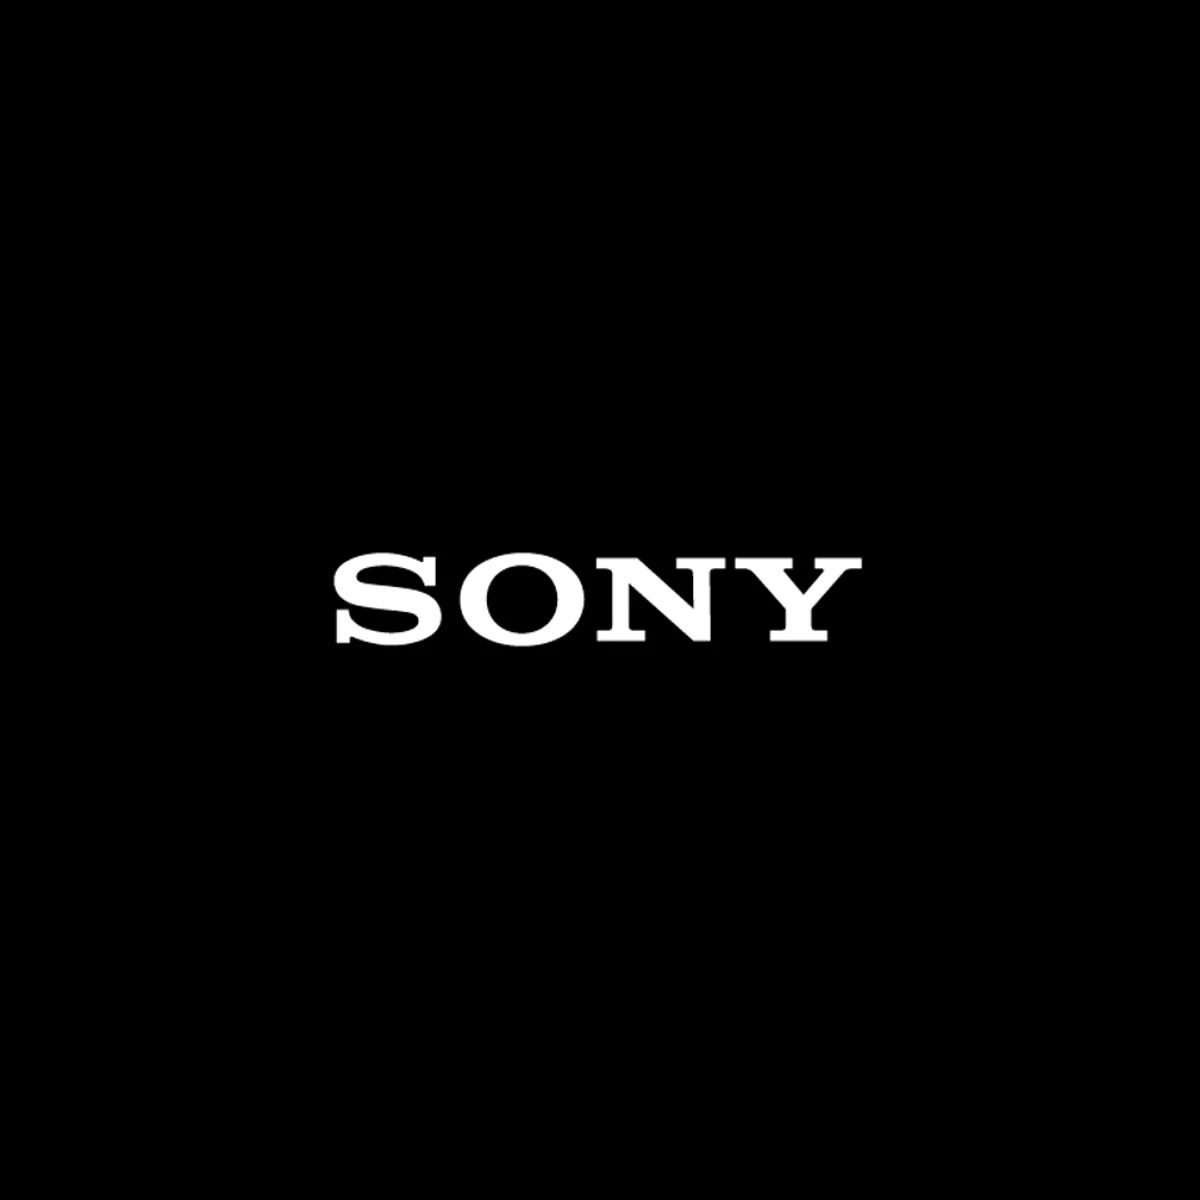 Sony Net Worth, Earnings and Revenue Wealthypipo